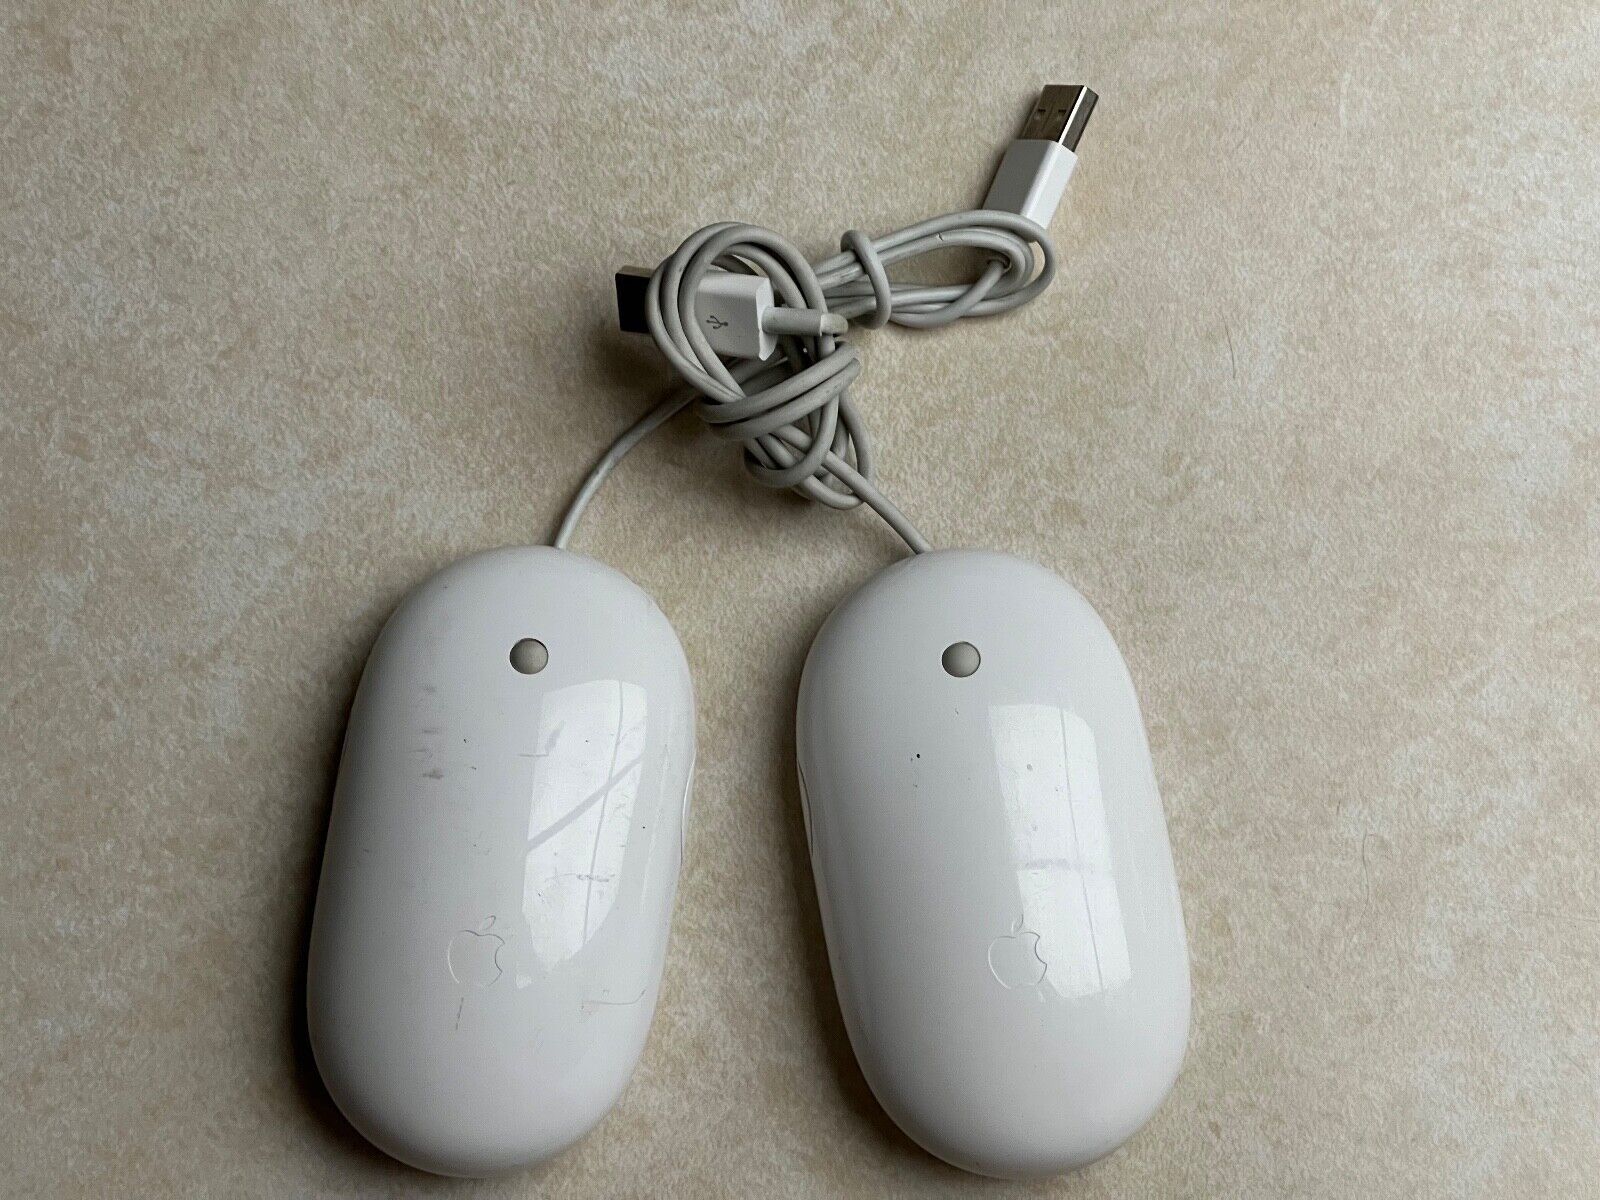 LOT OF TWO Genuine Apple A1152 USB Wired Mighty Mouse White EMC 2058 iMac Mac